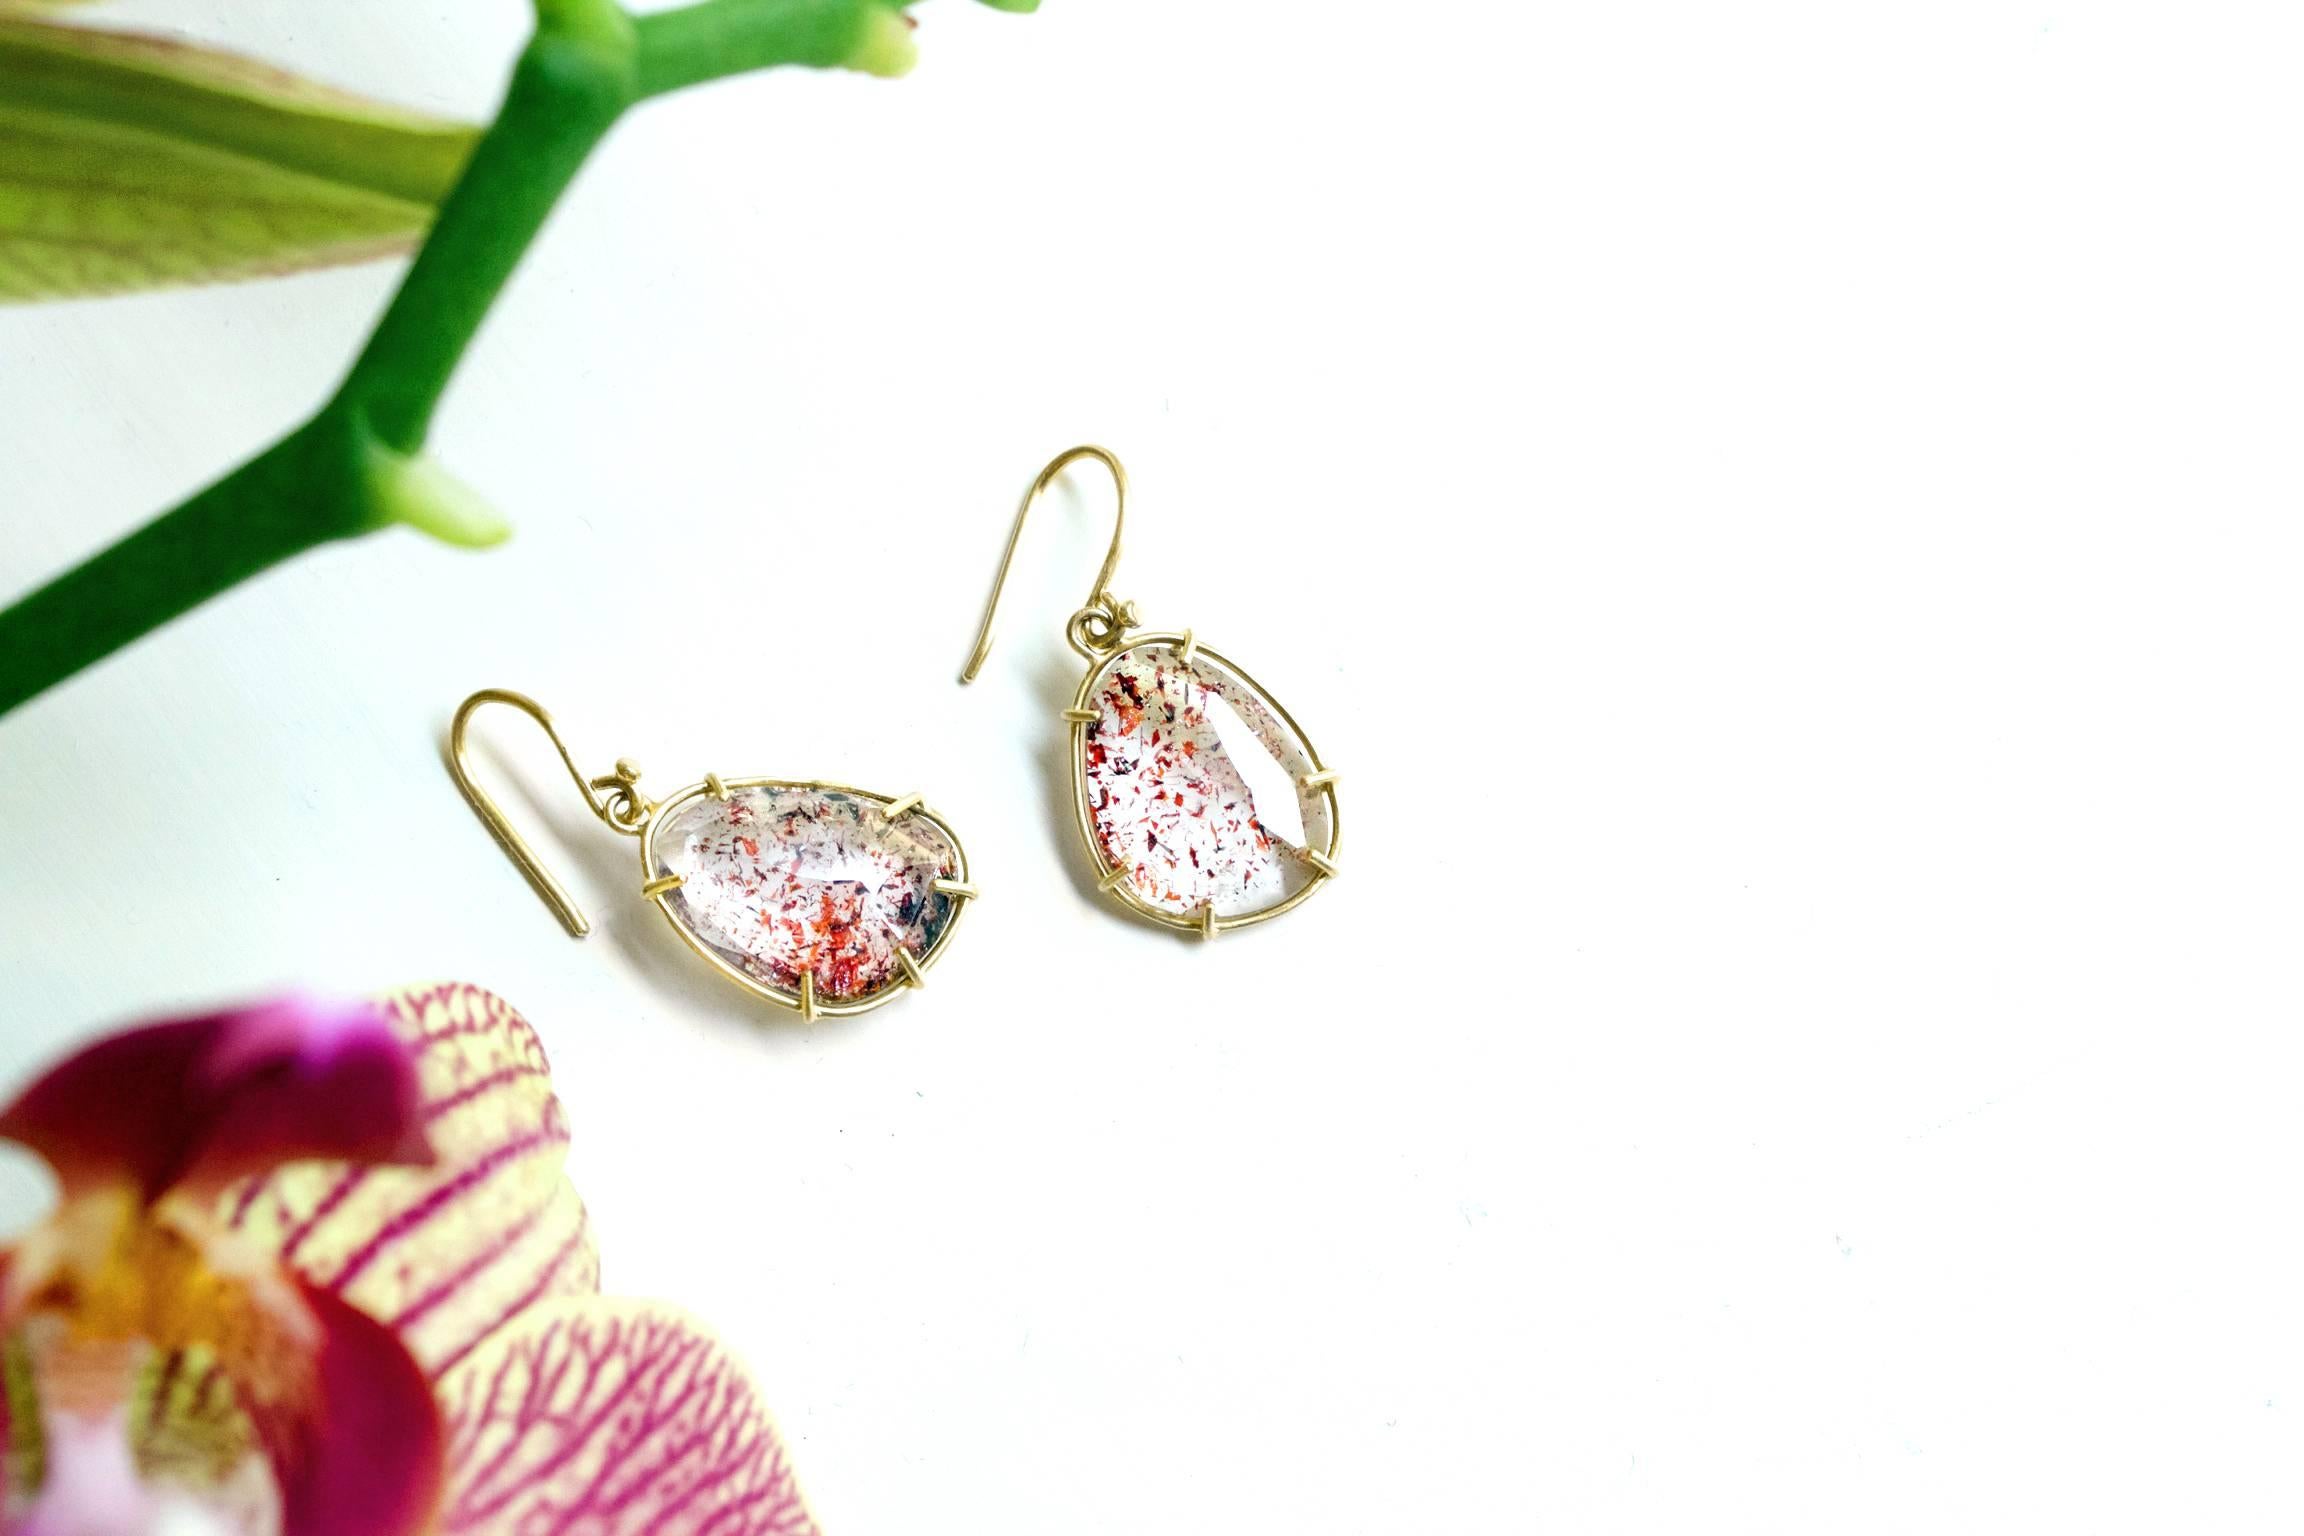 Cage Dangle Drop Earrings handcrafted by jewelry designer Monica Marcella in matte-finished 18k yellow gold featuring a spectacular matched pair of faceted strawberry quartz (lepidocrocite). 